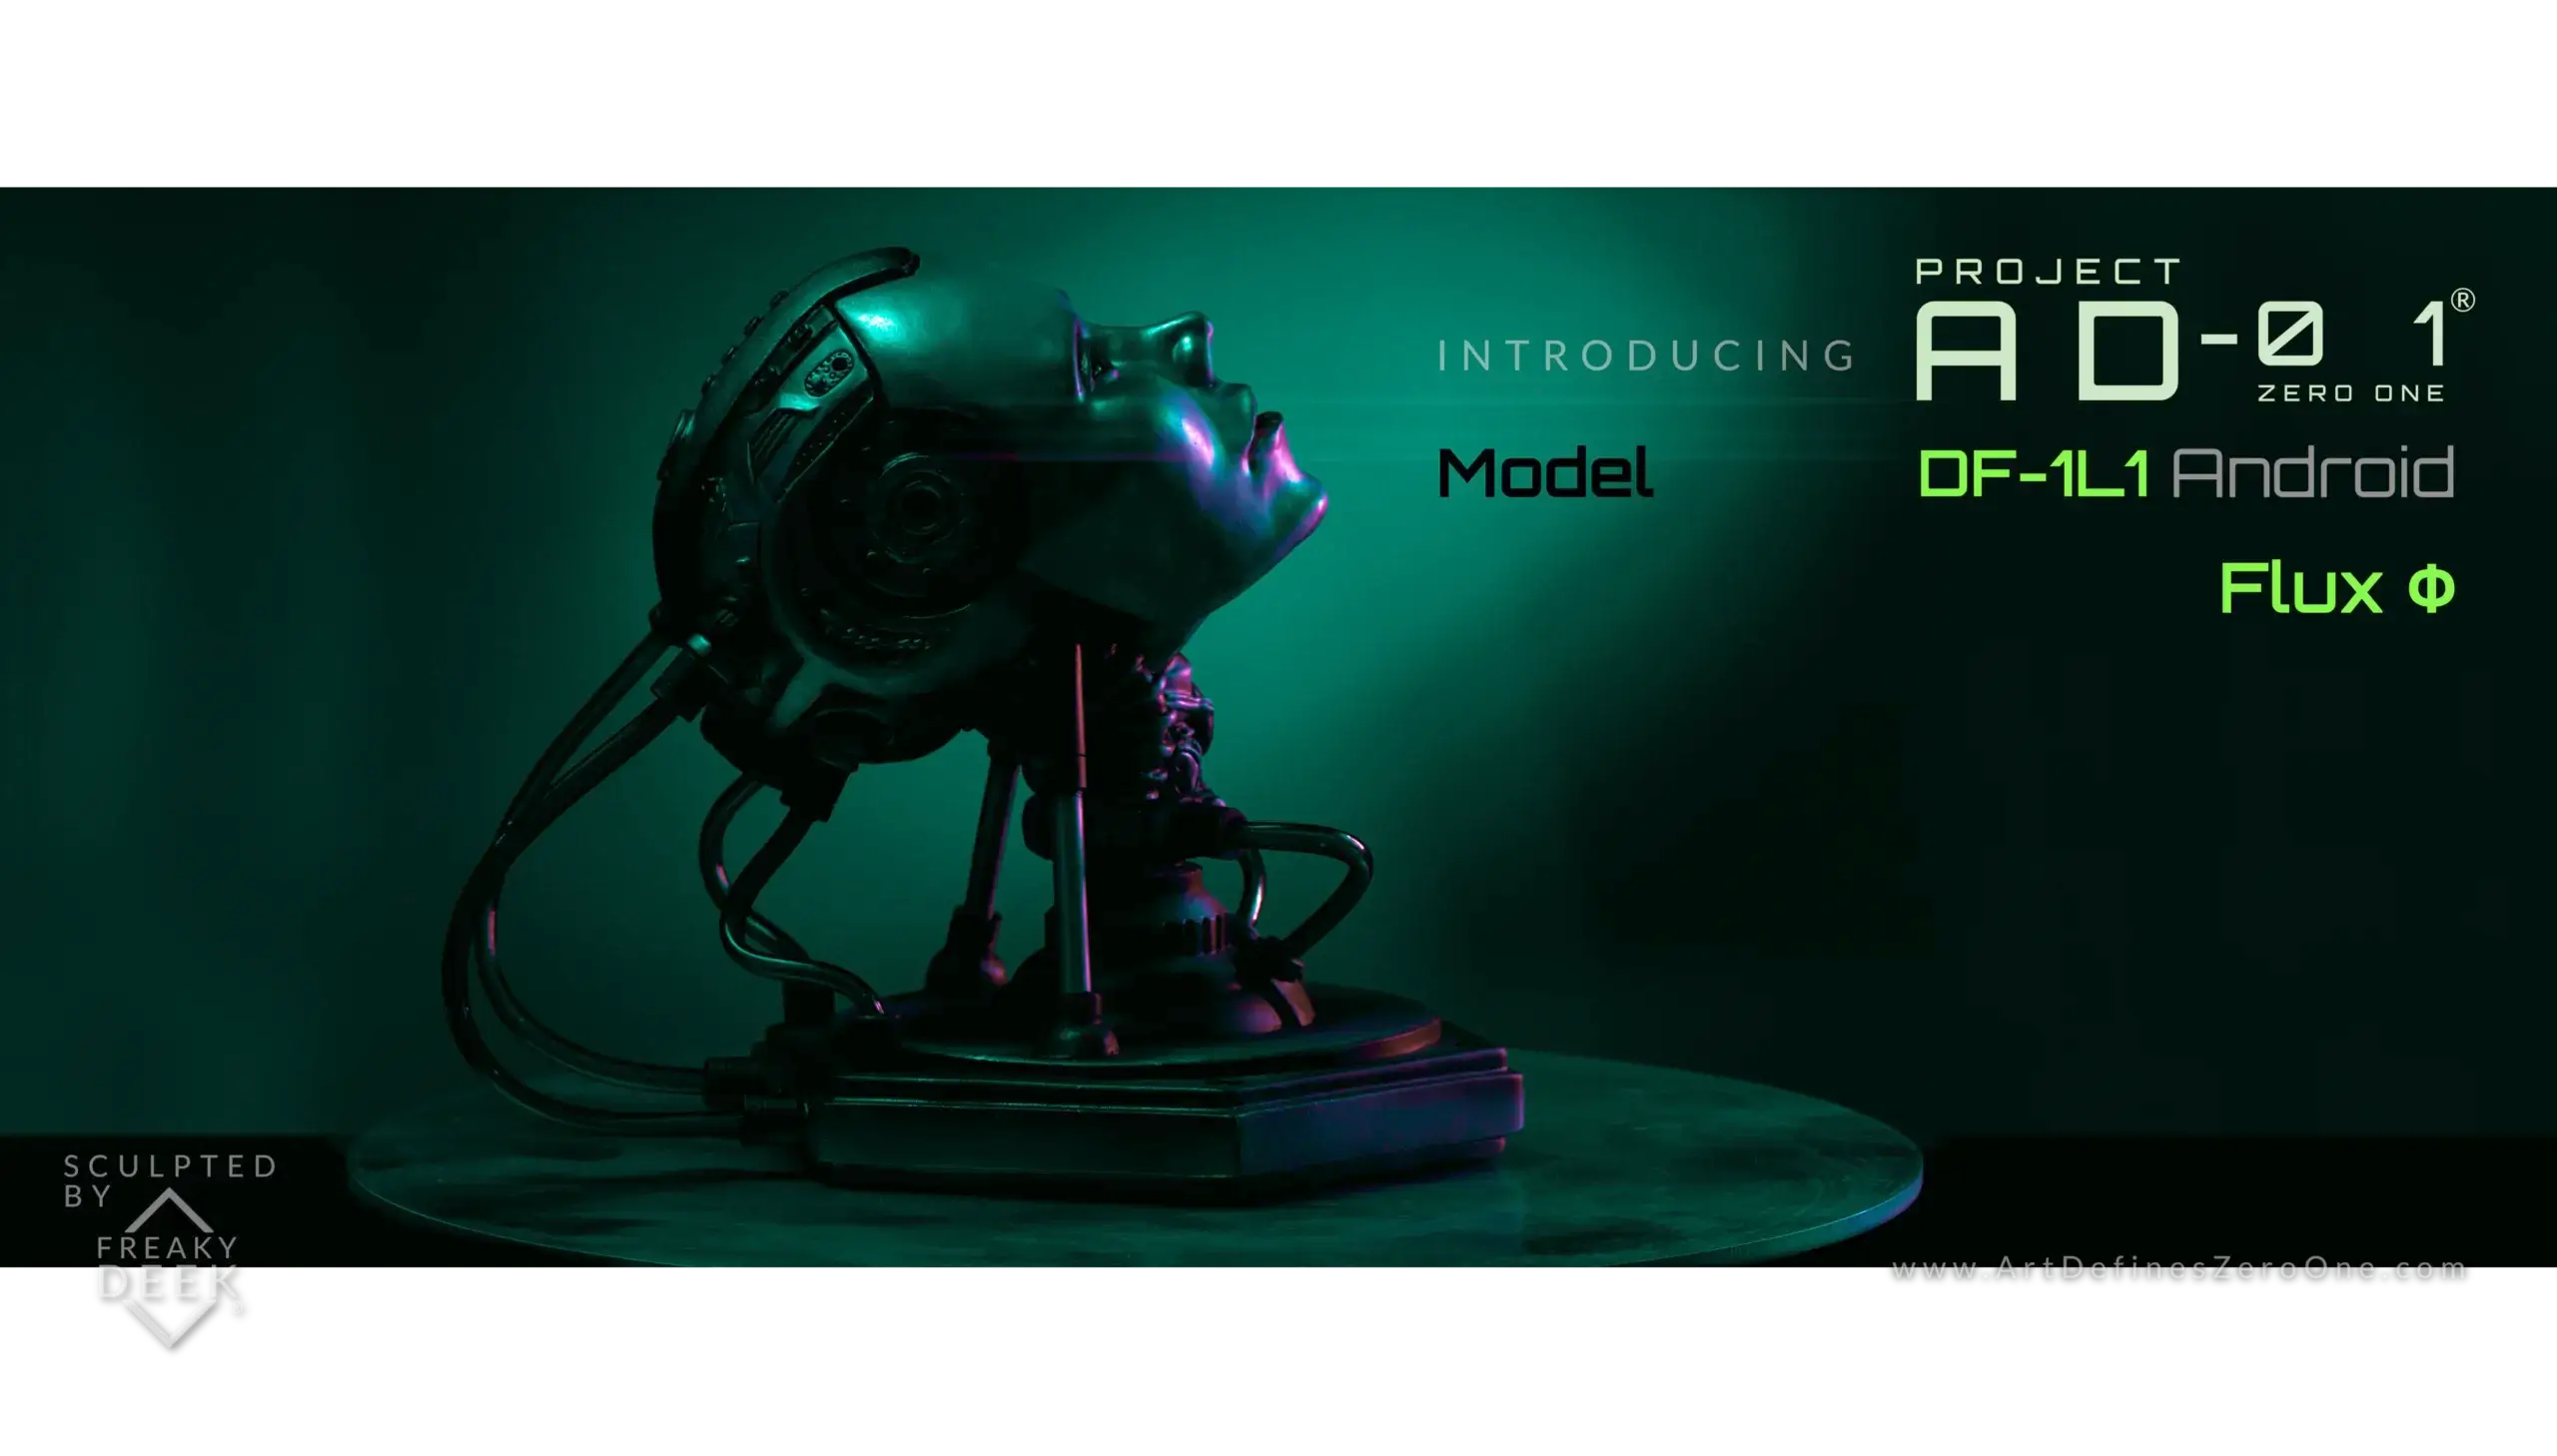 Project AD-01 handmade android green sculpture Flux side view